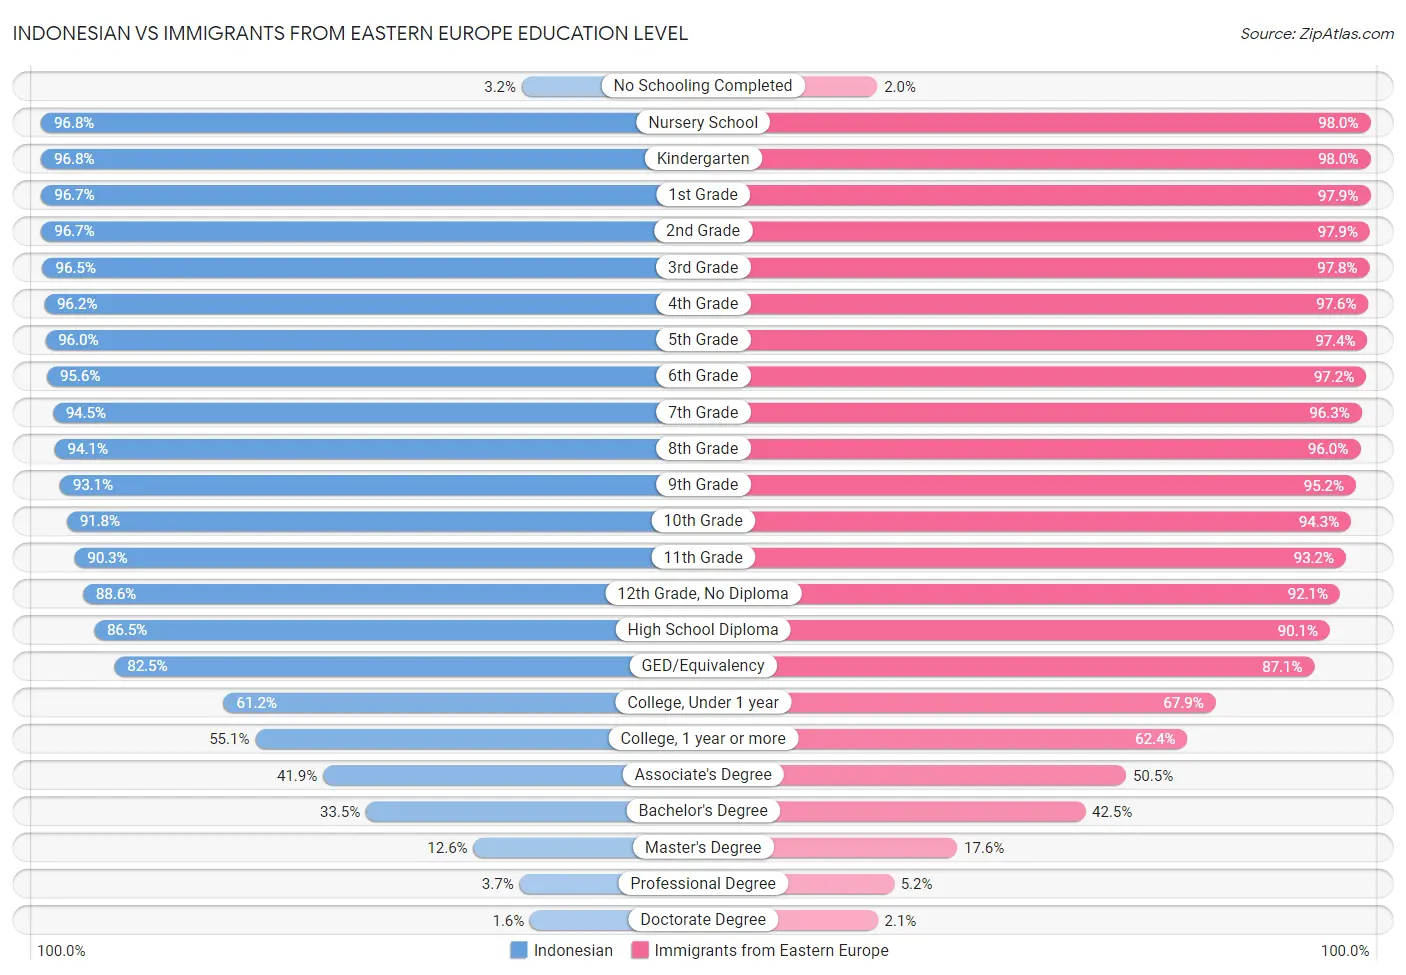 Indonesian vs Immigrants from Eastern Europe Education Level